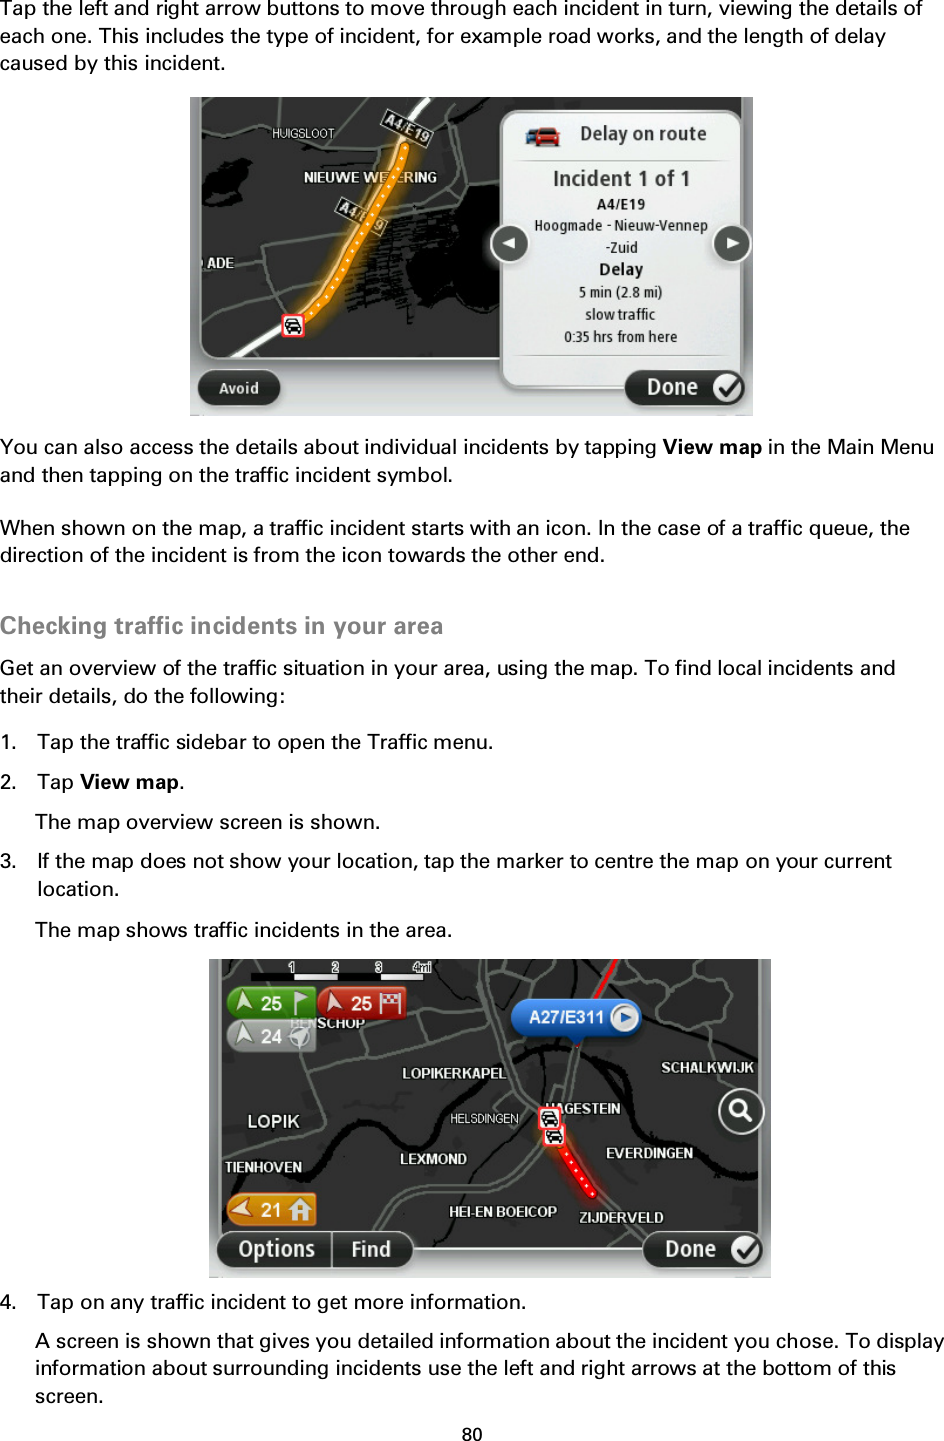 80    Tap the left and right arrow buttons to move through each incident in turn, viewing the details of each one. This includes the type of incident, for example road works, and the length of delay caused by this incident.  You can also access the details about individual incidents by tapping View map in the Main Menu and then tapping on the traffic incident symbol. When shown on the map, a traffic incident starts with an icon. In the case of a traffic queue, the direction of the incident is from the icon towards the other end.  Checking traffic incidents in your area Get an overview of the traffic situation in your area, using the map. To find local incidents and their details, do the following: 1. Tap the traffic sidebar to open the Traffic menu. 2. Tap View map. The map overview screen is shown. 3. If the map does not show your location, tap the marker to centre the map on your current location. The map shows traffic incidents in the area.  4. Tap on any traffic incident to get more information. A screen is shown that gives you detailed information about the incident you chose. To display information about surrounding incidents use the left and right arrows at the bottom of this screen.  